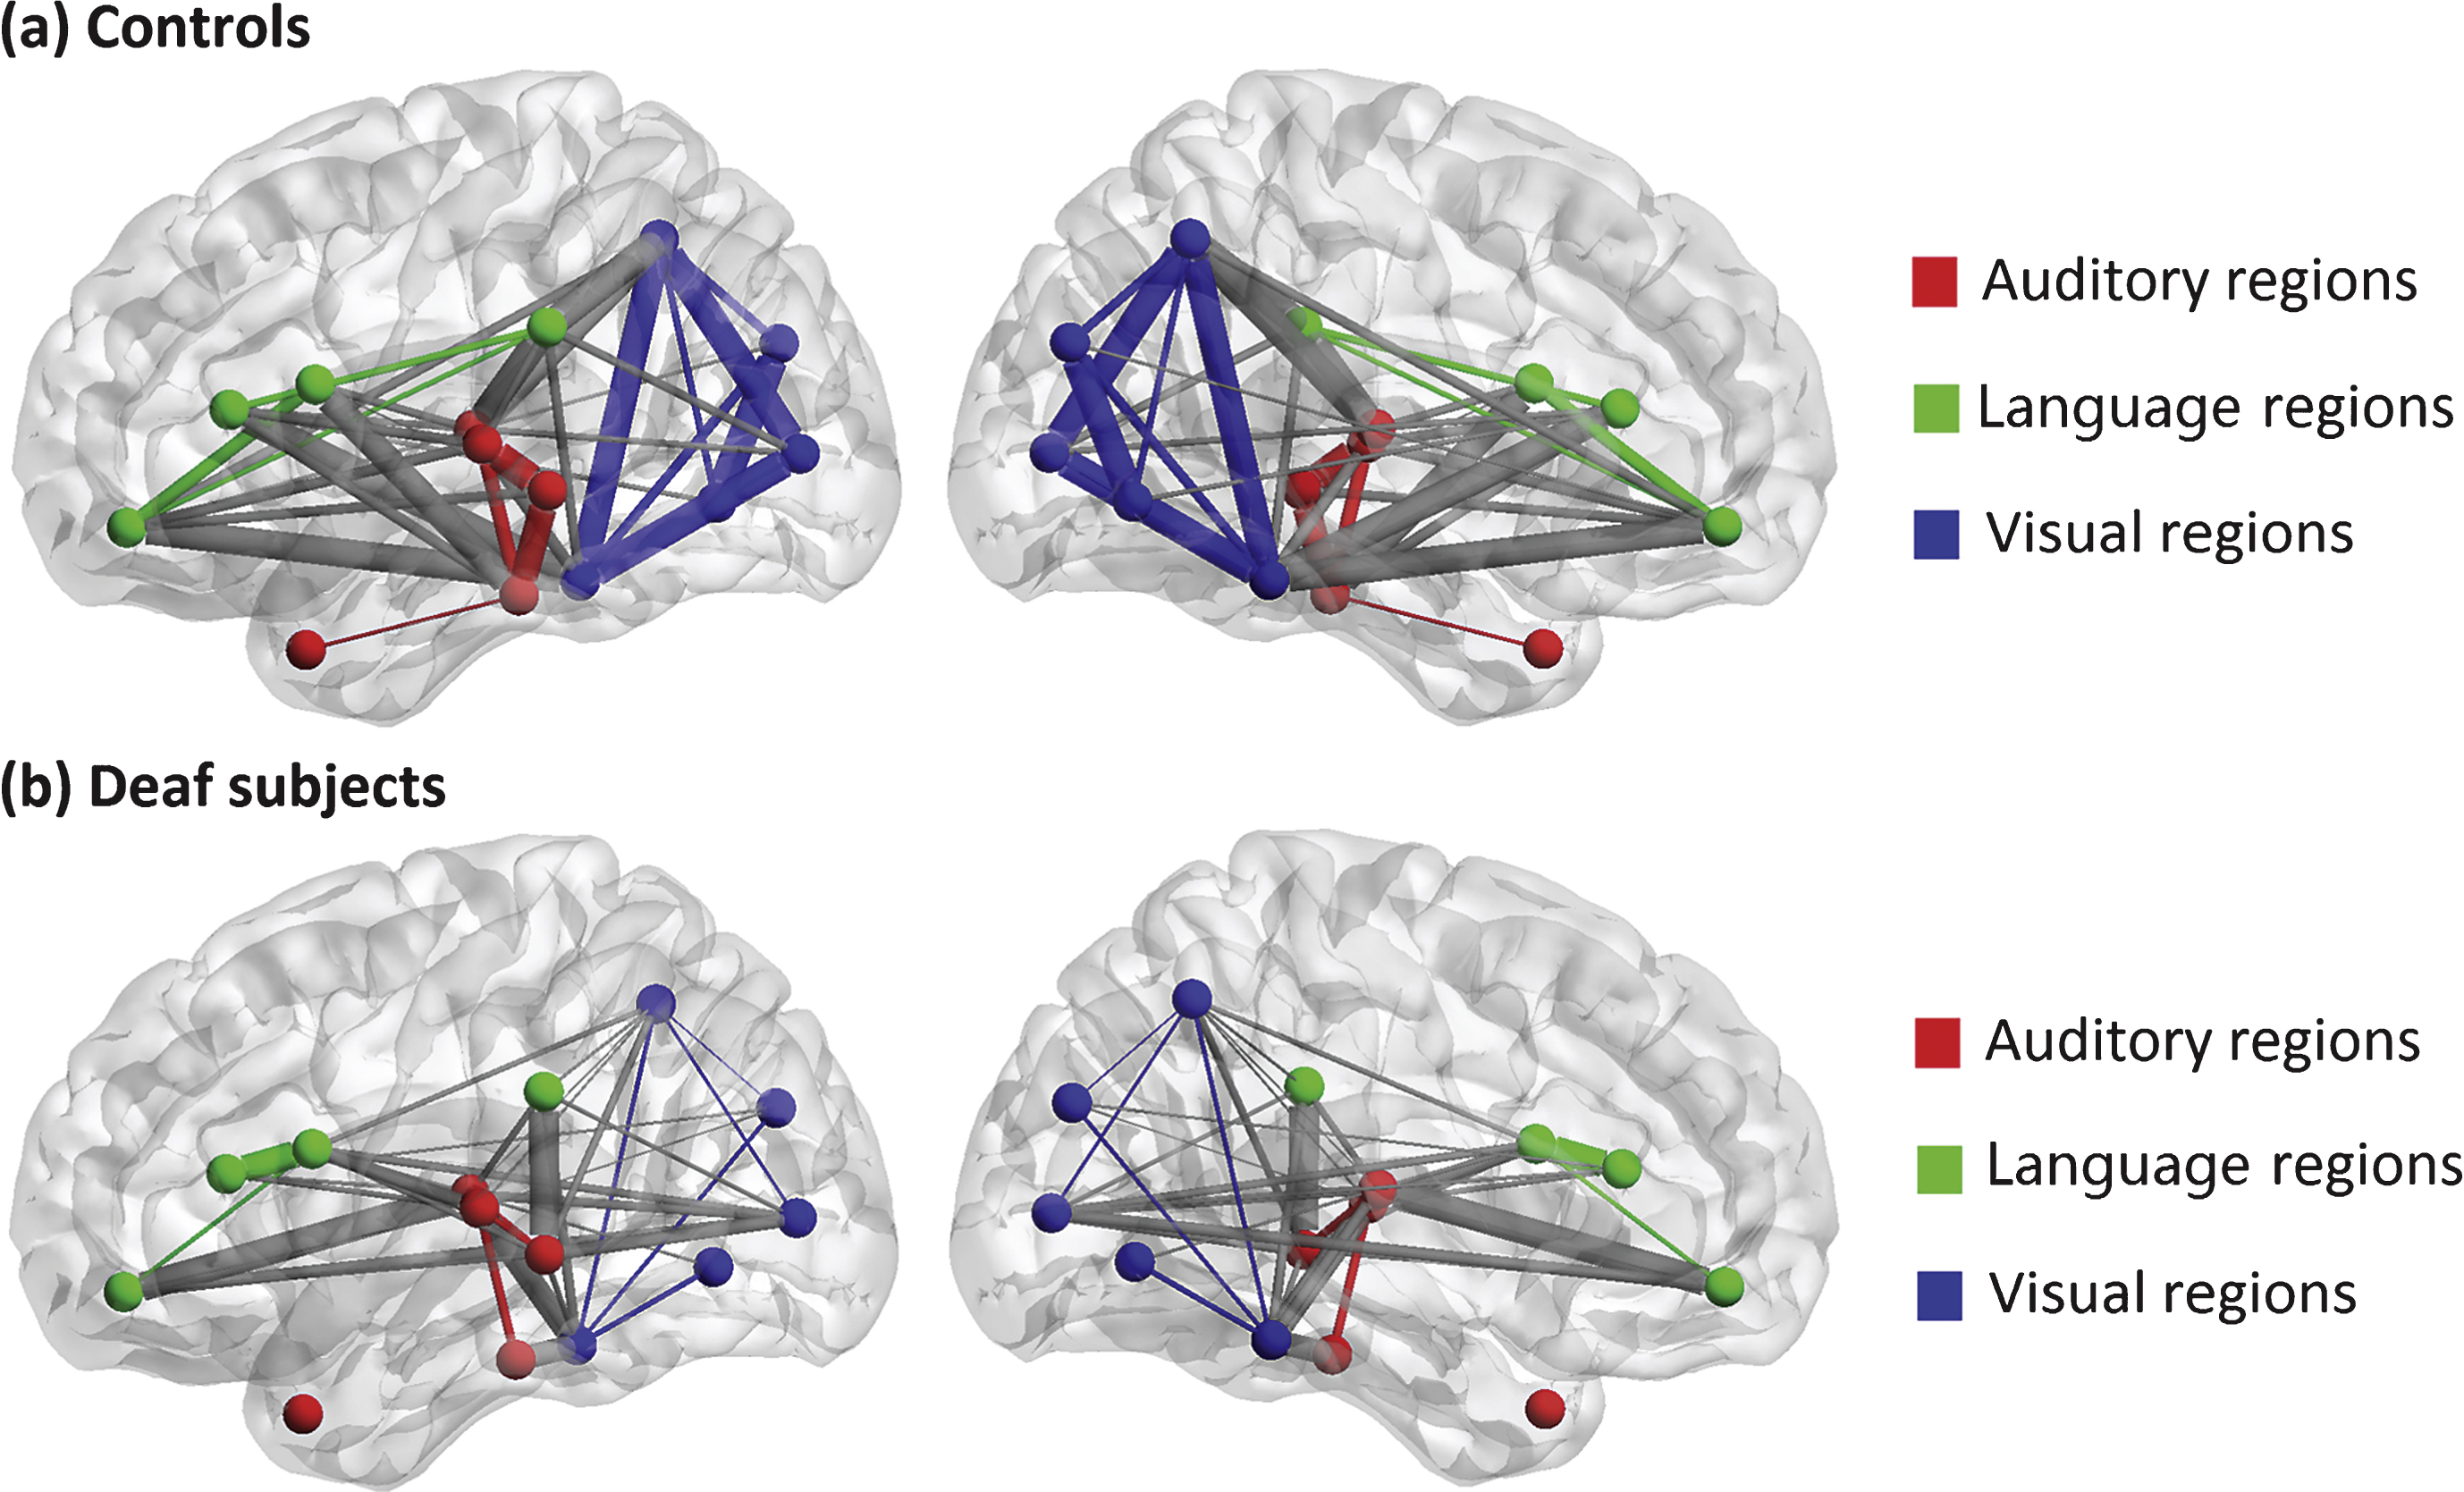 A 3D view of grey matter connectivity within and between auditory, language and visual systems in (a) normal controls and (b) deaf subjects. The lateral and medium views are shown. The nodes involved in auditory, language and visual processing are represented by red, green and blue respectively. The connections within each system are shown as the same color as the nodes, and the connections between these systems are present in grey color. Thicker edges indicate stronger connectivity, while thinner edges indicate weaker connectivity.